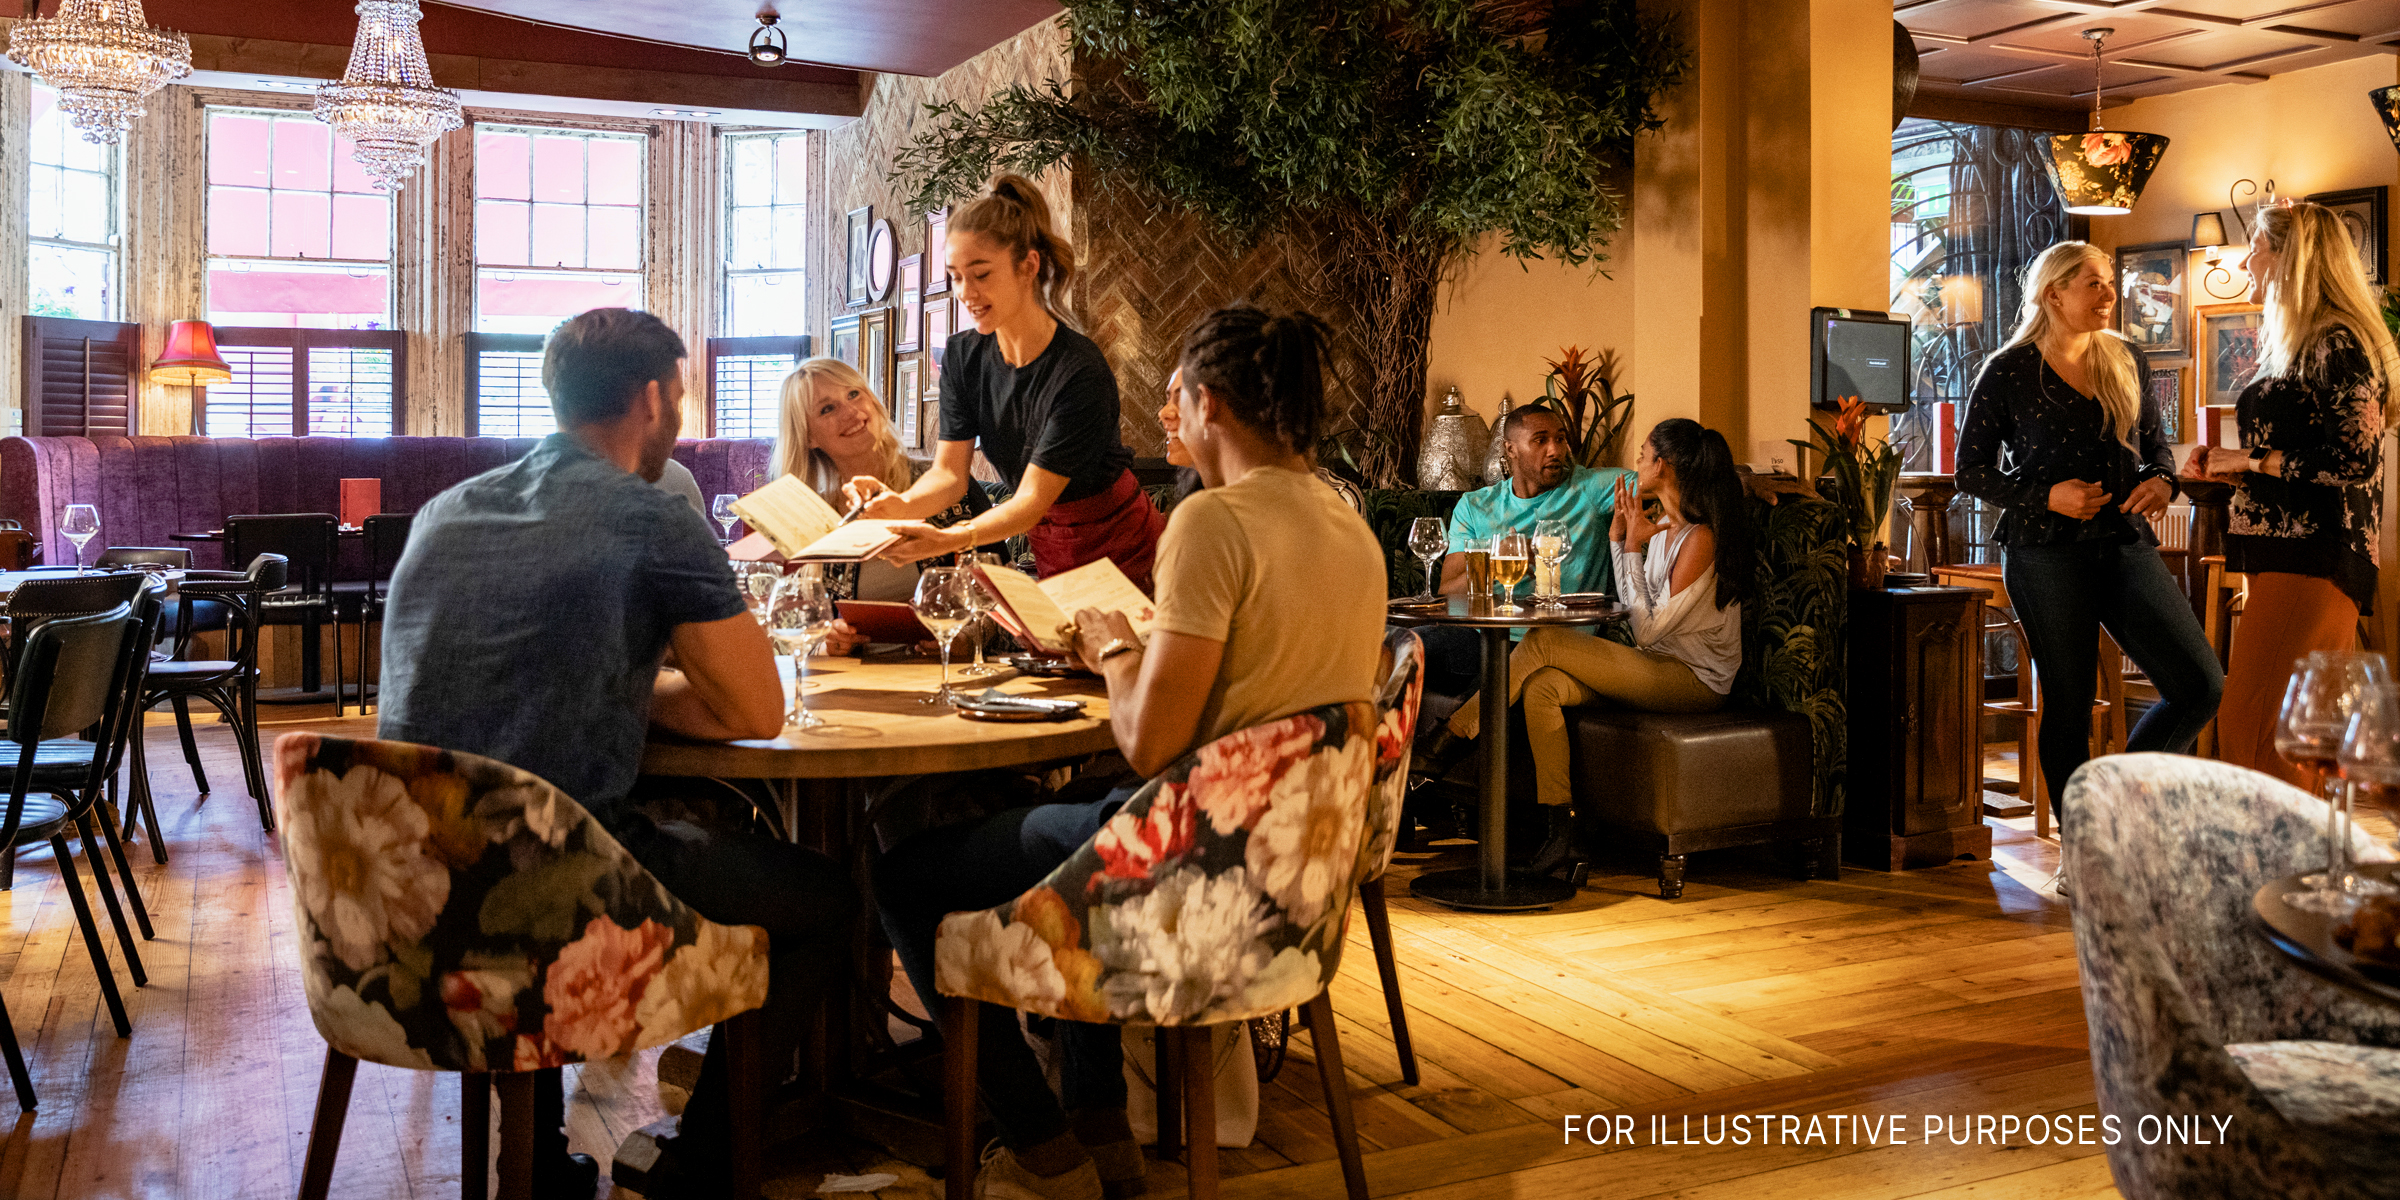 People dining in a restaurant | Source: Shutterstock